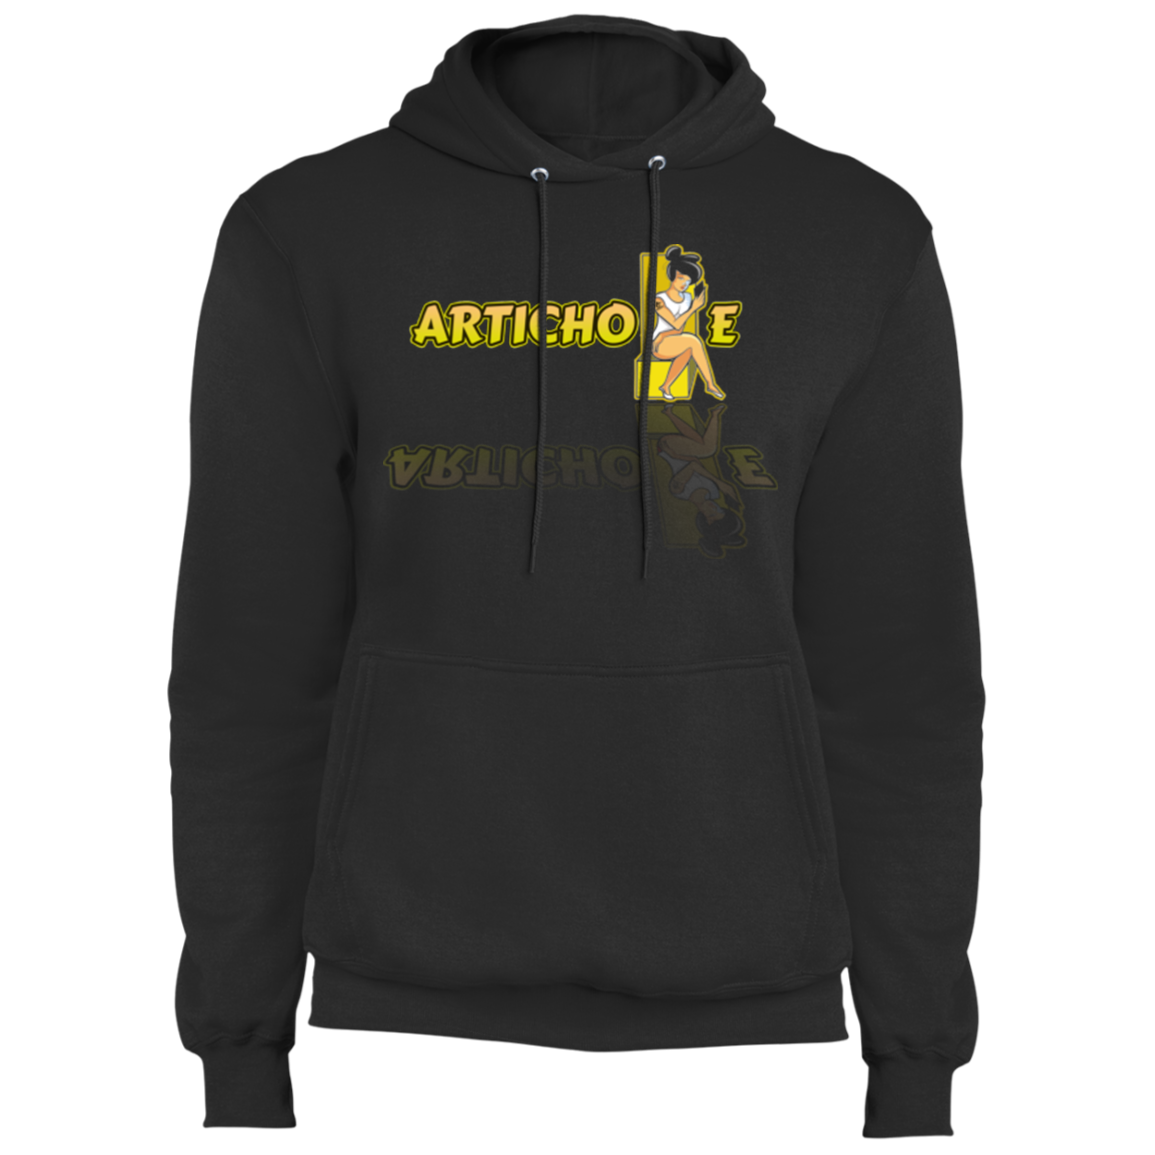 ArtichokeUSA Character and Font Design. Let’s Create Your Own Design Today. Brooklyn. Fleece Hoodie